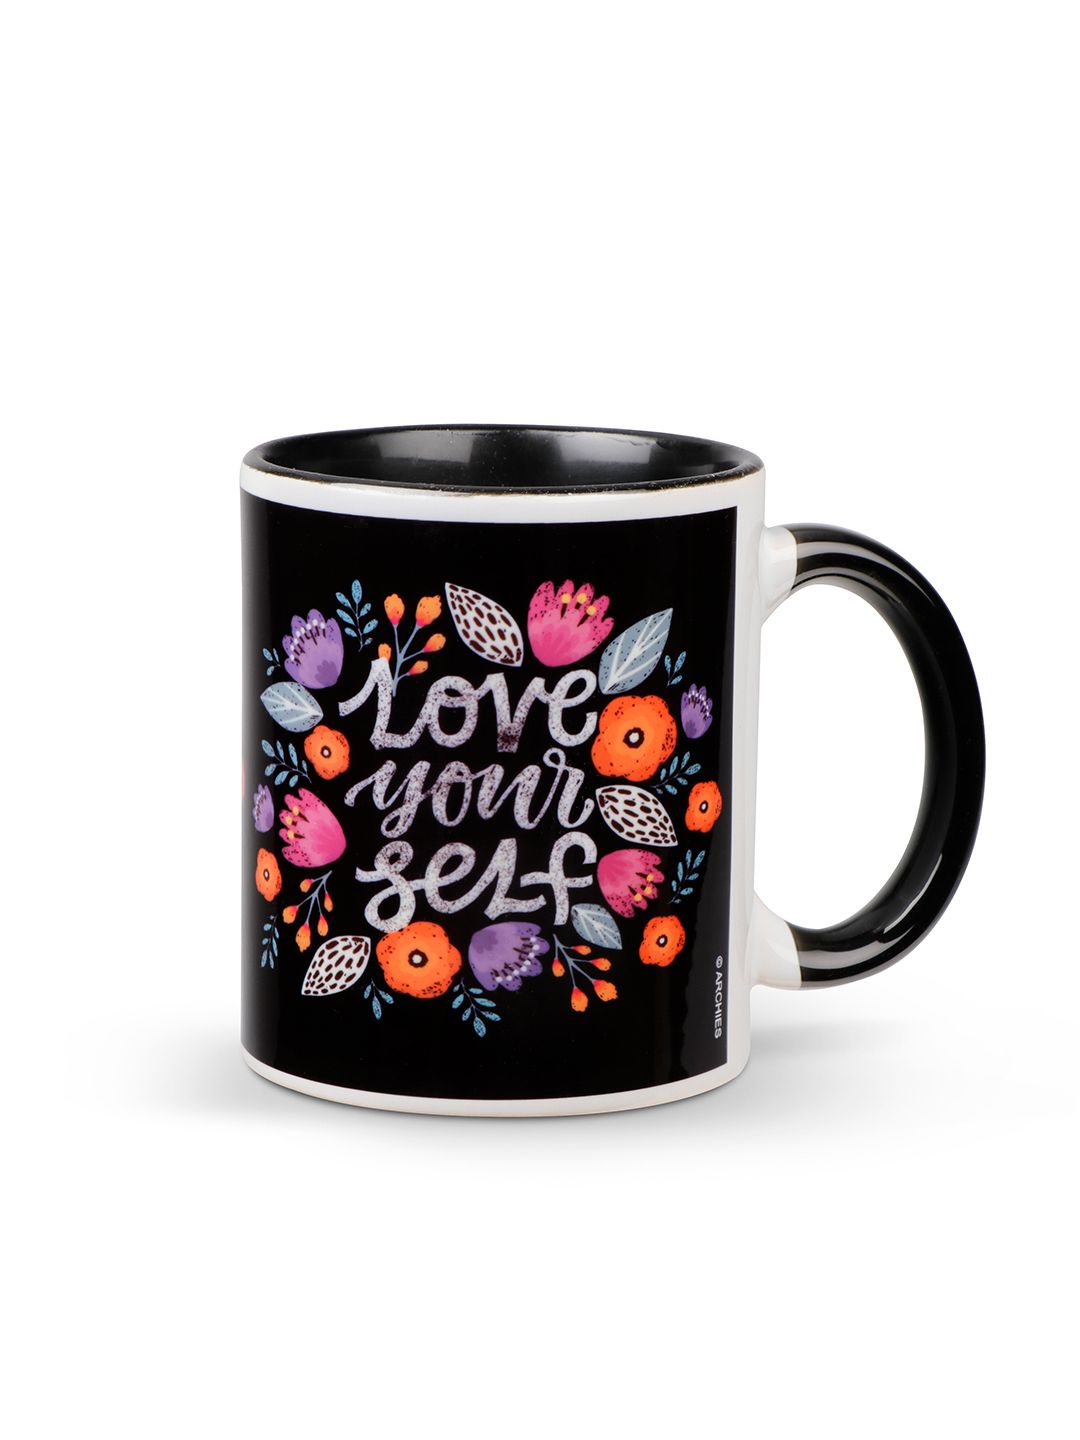 Archies White & Black Printed Ceramic Glossy Mugs Set of Cups and Mugs Price in India